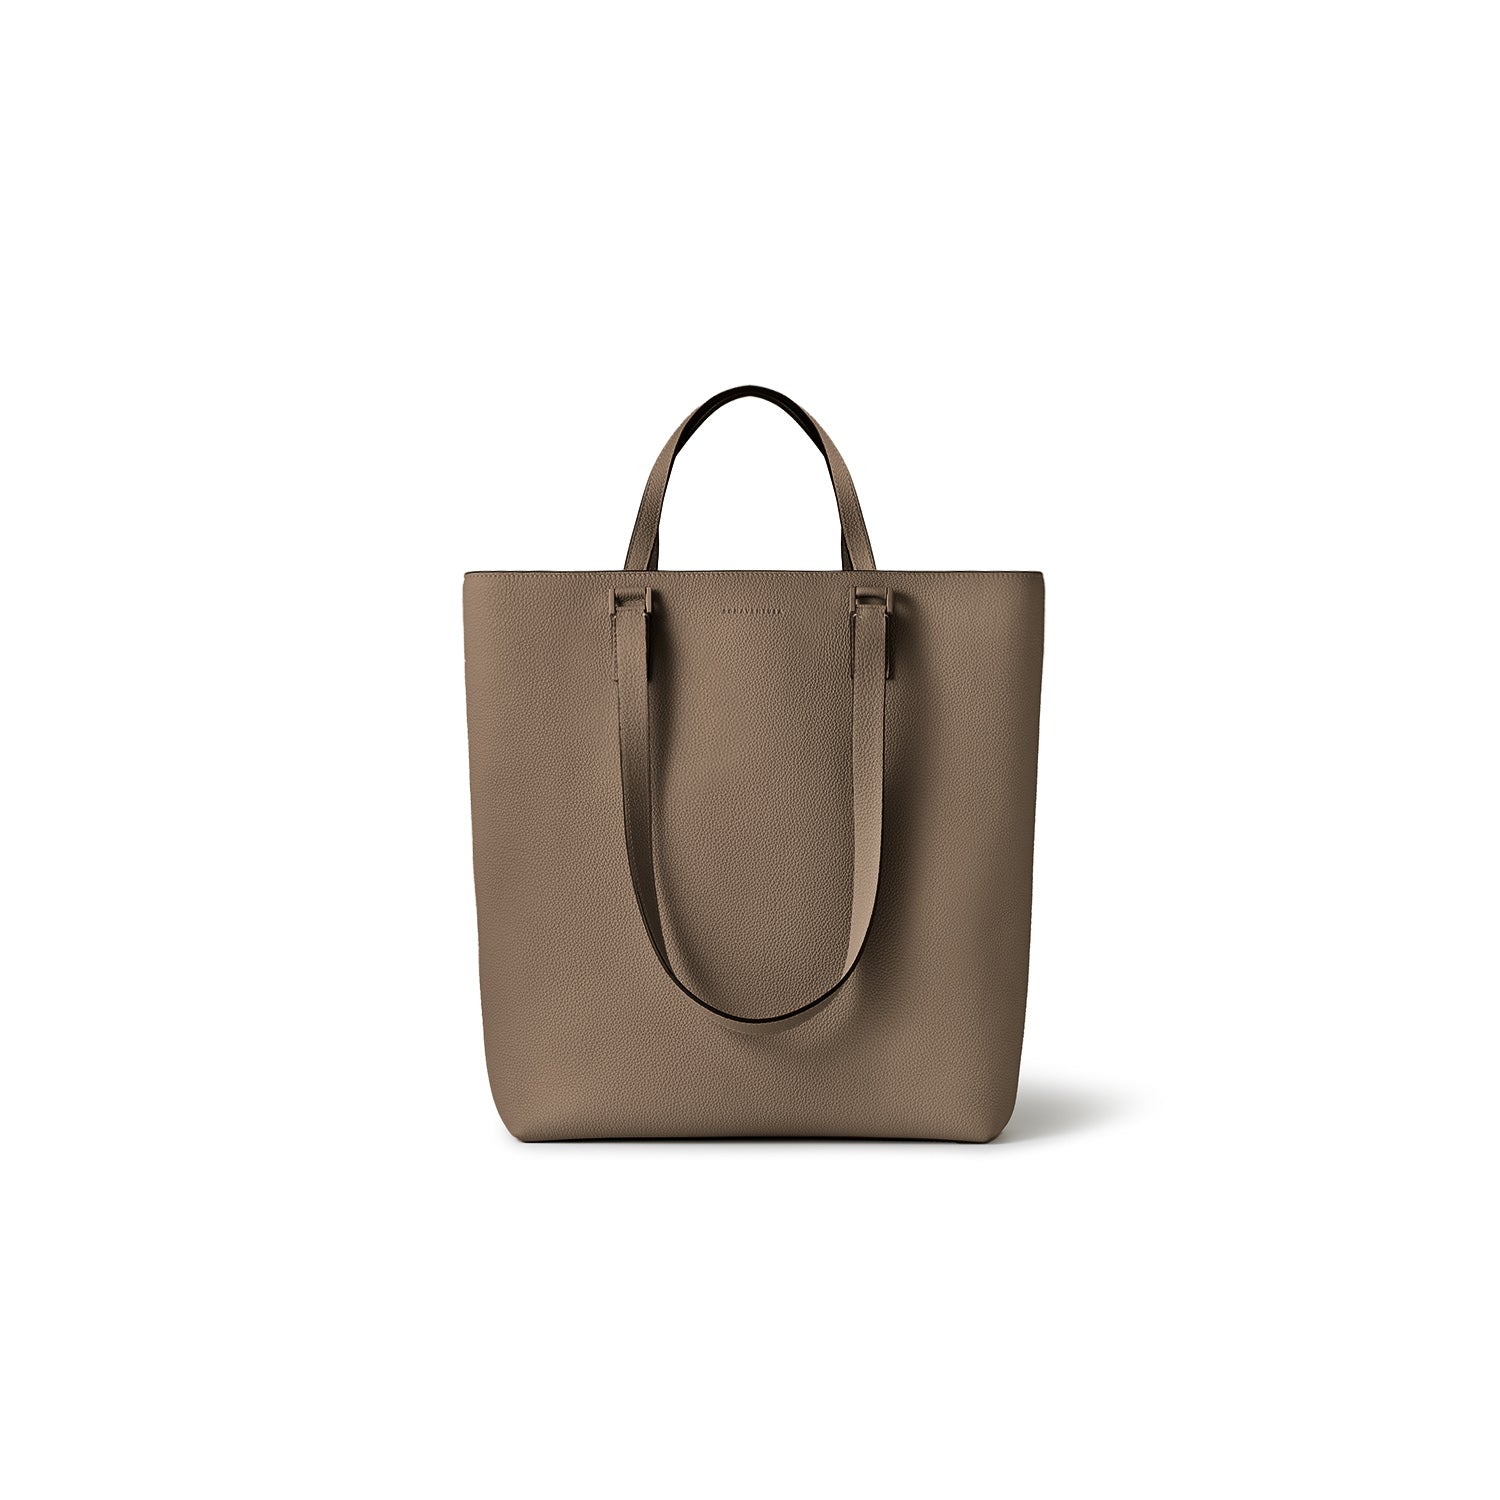 Cleo Tote Bag in Shrink Leather